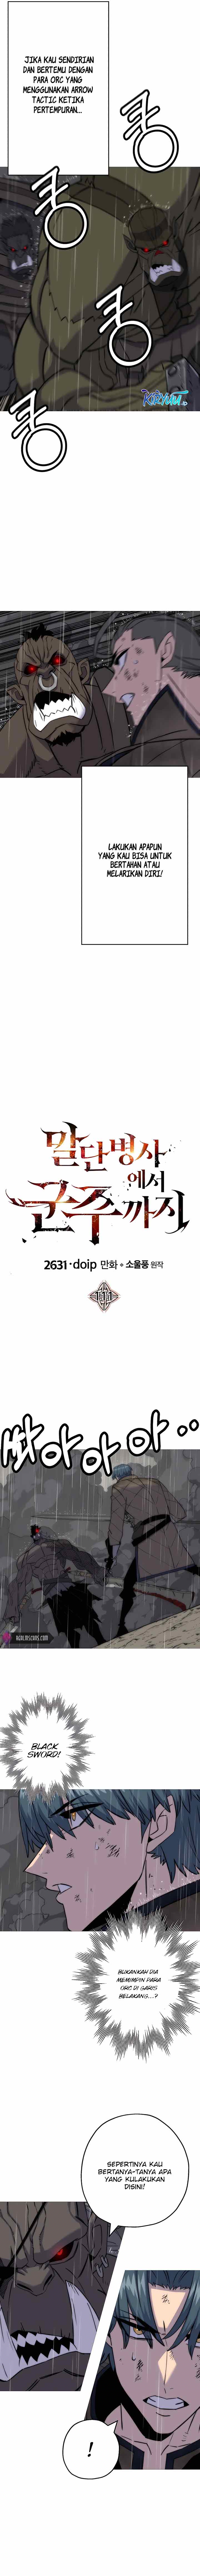 Dilarang COPAS - situs resmi www.mangacanblog.com - Komik the story of a low rank soldier becoming a monarch 111 - chapter 111 112 Indonesia the story of a low rank soldier becoming a monarch 111 - chapter 111 Terbaru 3|Baca Manga Komik Indonesia|Mangacan